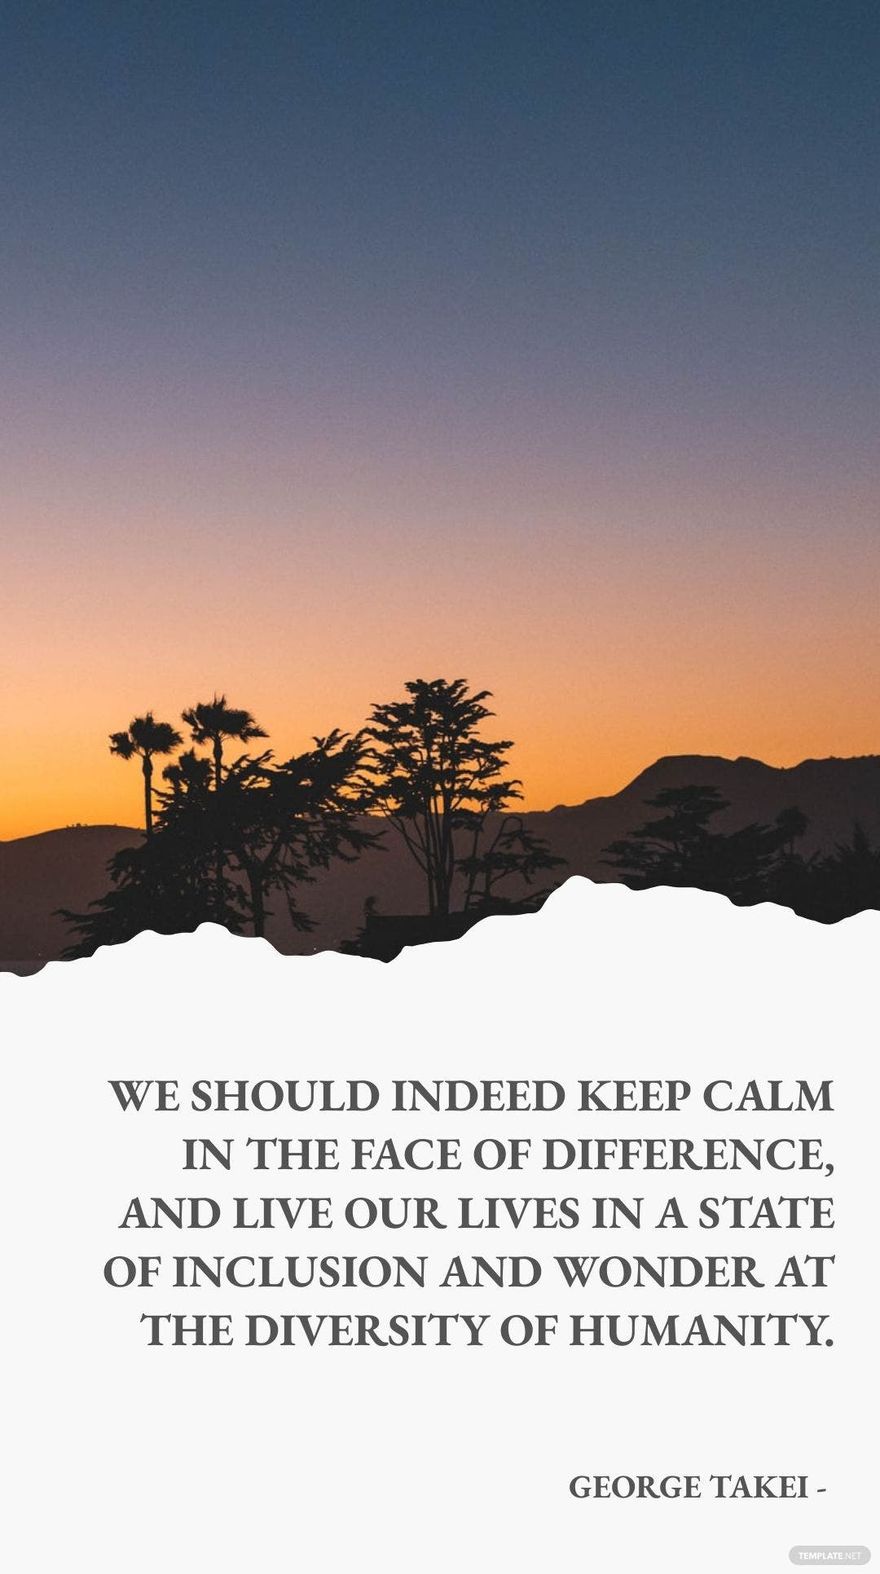 George Takei - We should indeed keep calm in the face of difference, and live our lives in a state of inclusion and wonder at the diversity of humanity.